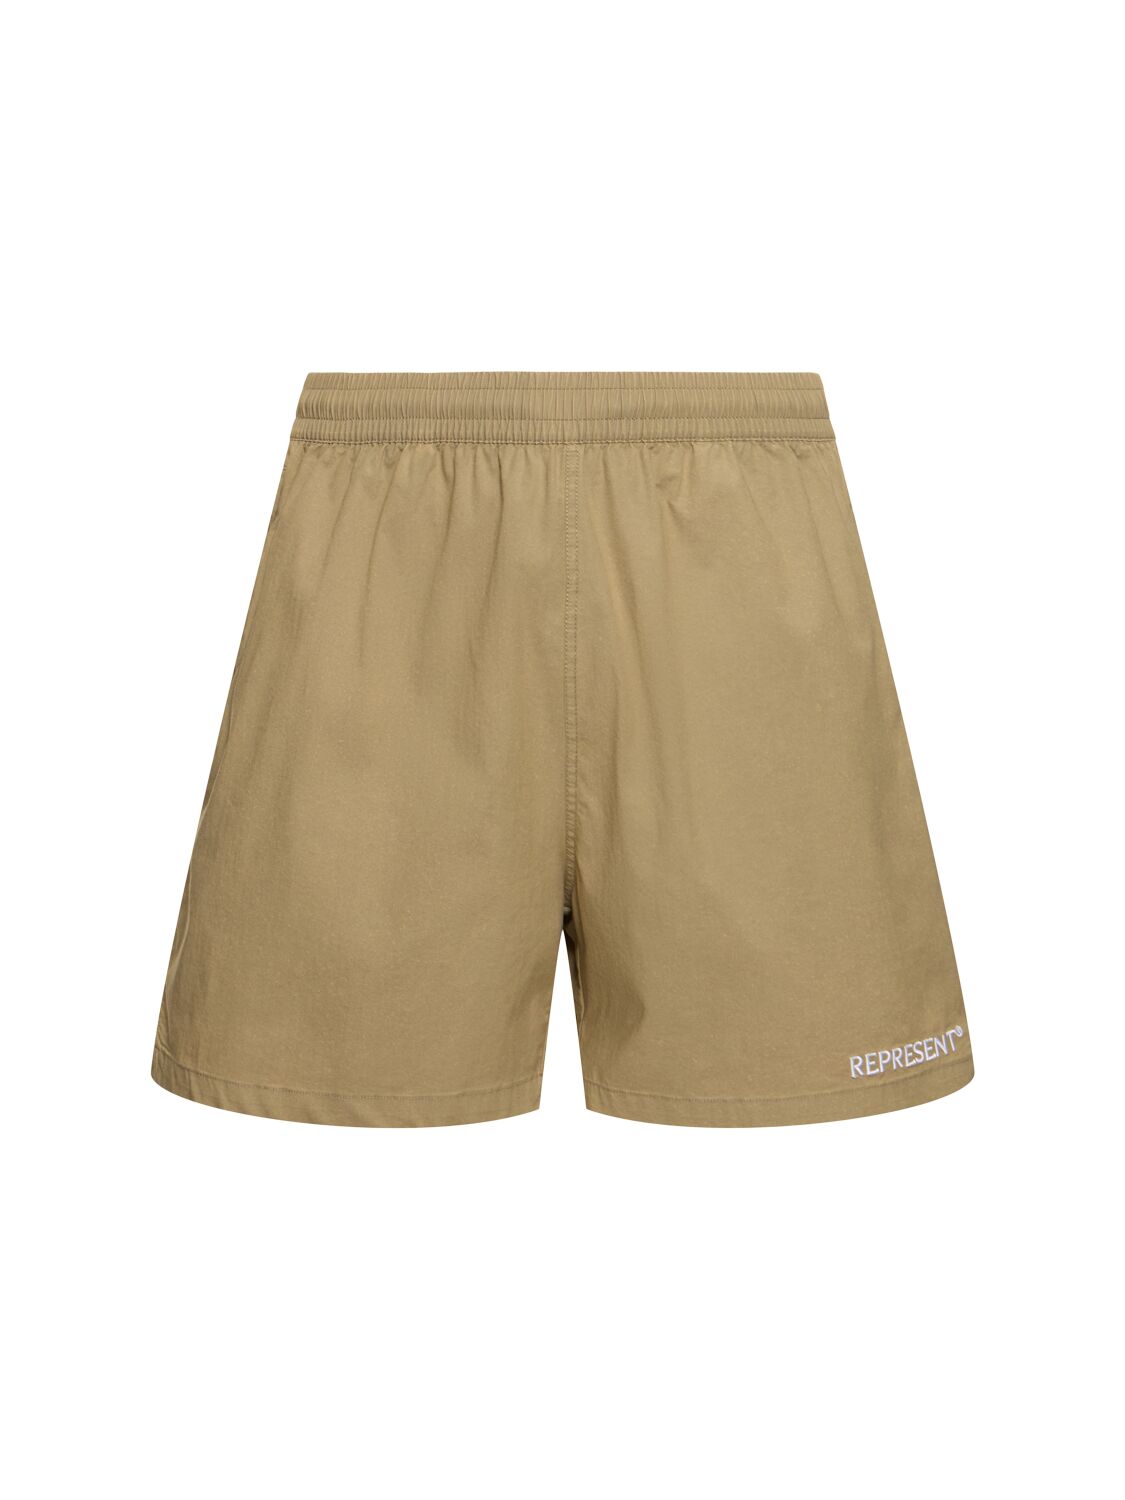 Represent Cotton Blend Shorts In Olive Green